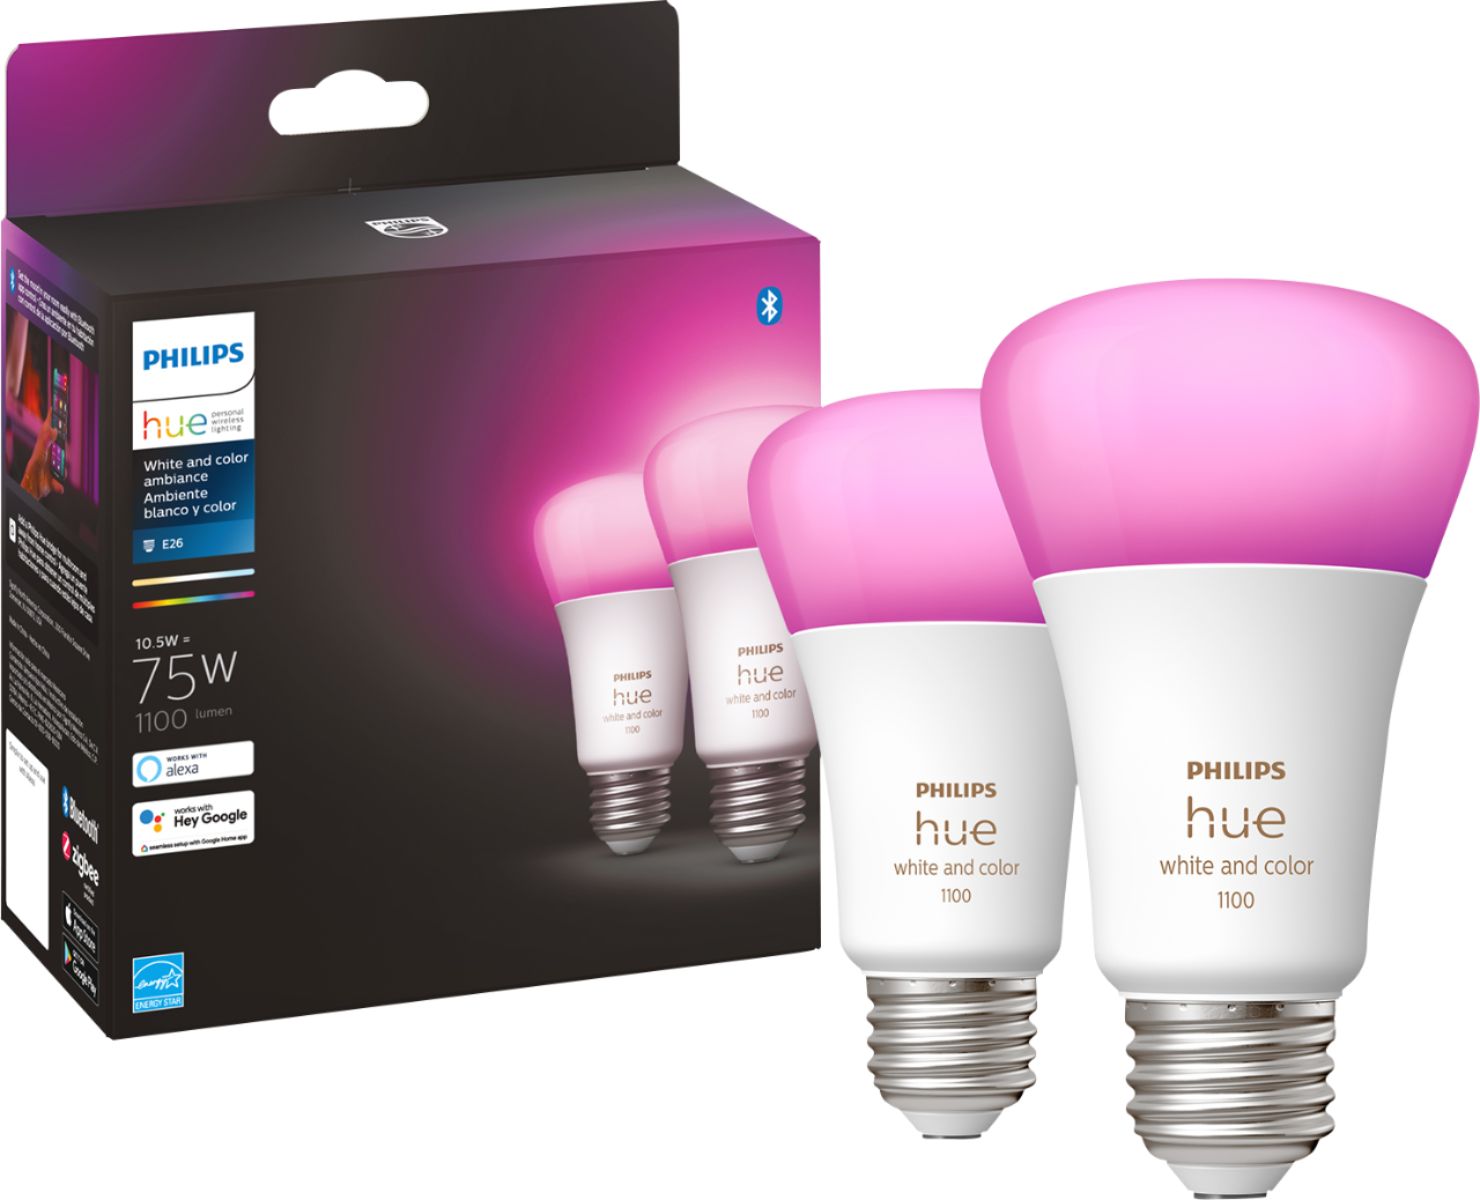 Philips Hue White and Color Ambiance LED Smart Bulb Kit w/ Switch 